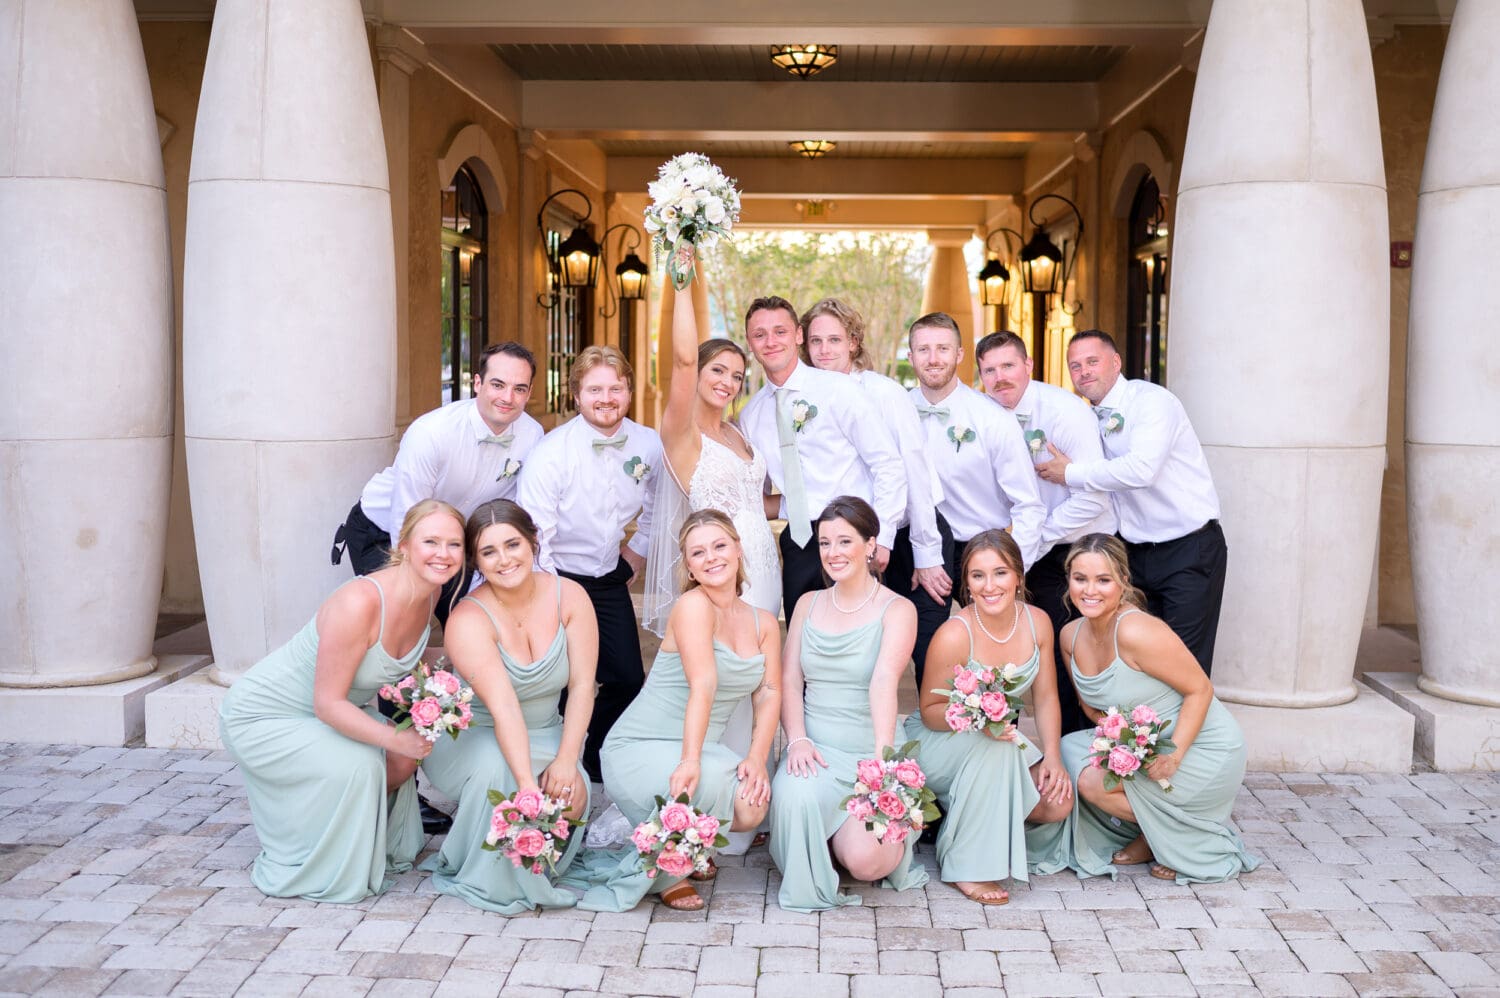 Fun pictures with the bridal party in the courtyard - 21 Main Events